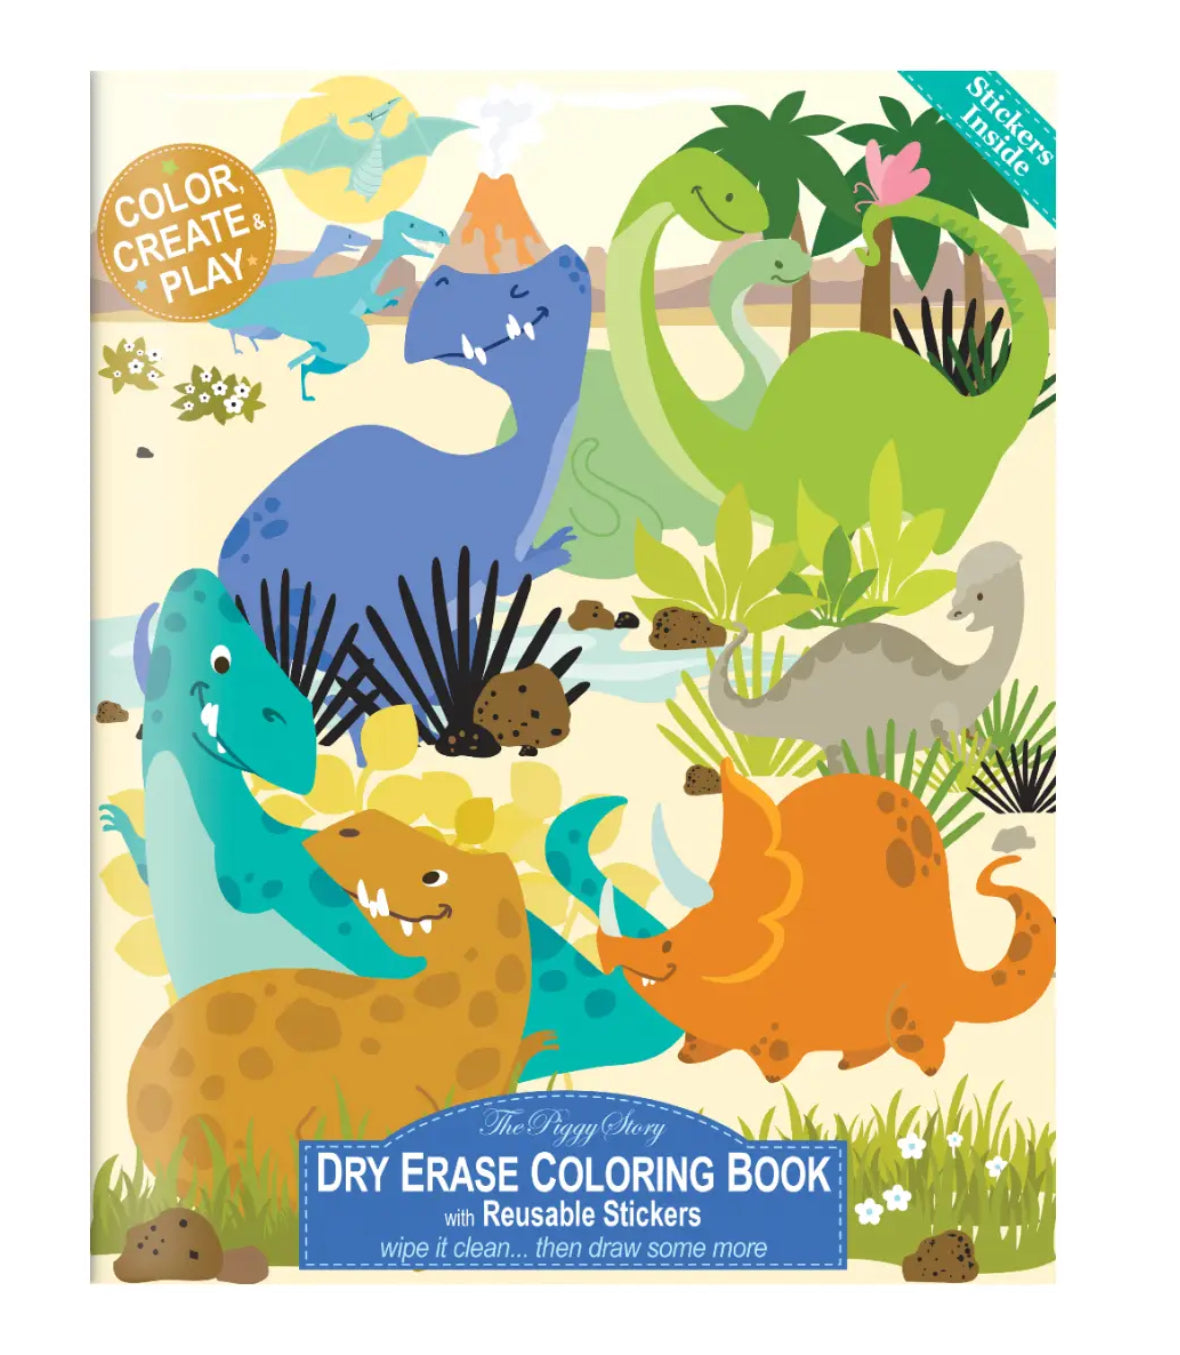 Dry Erase Coloring Book with Reusable Stickers